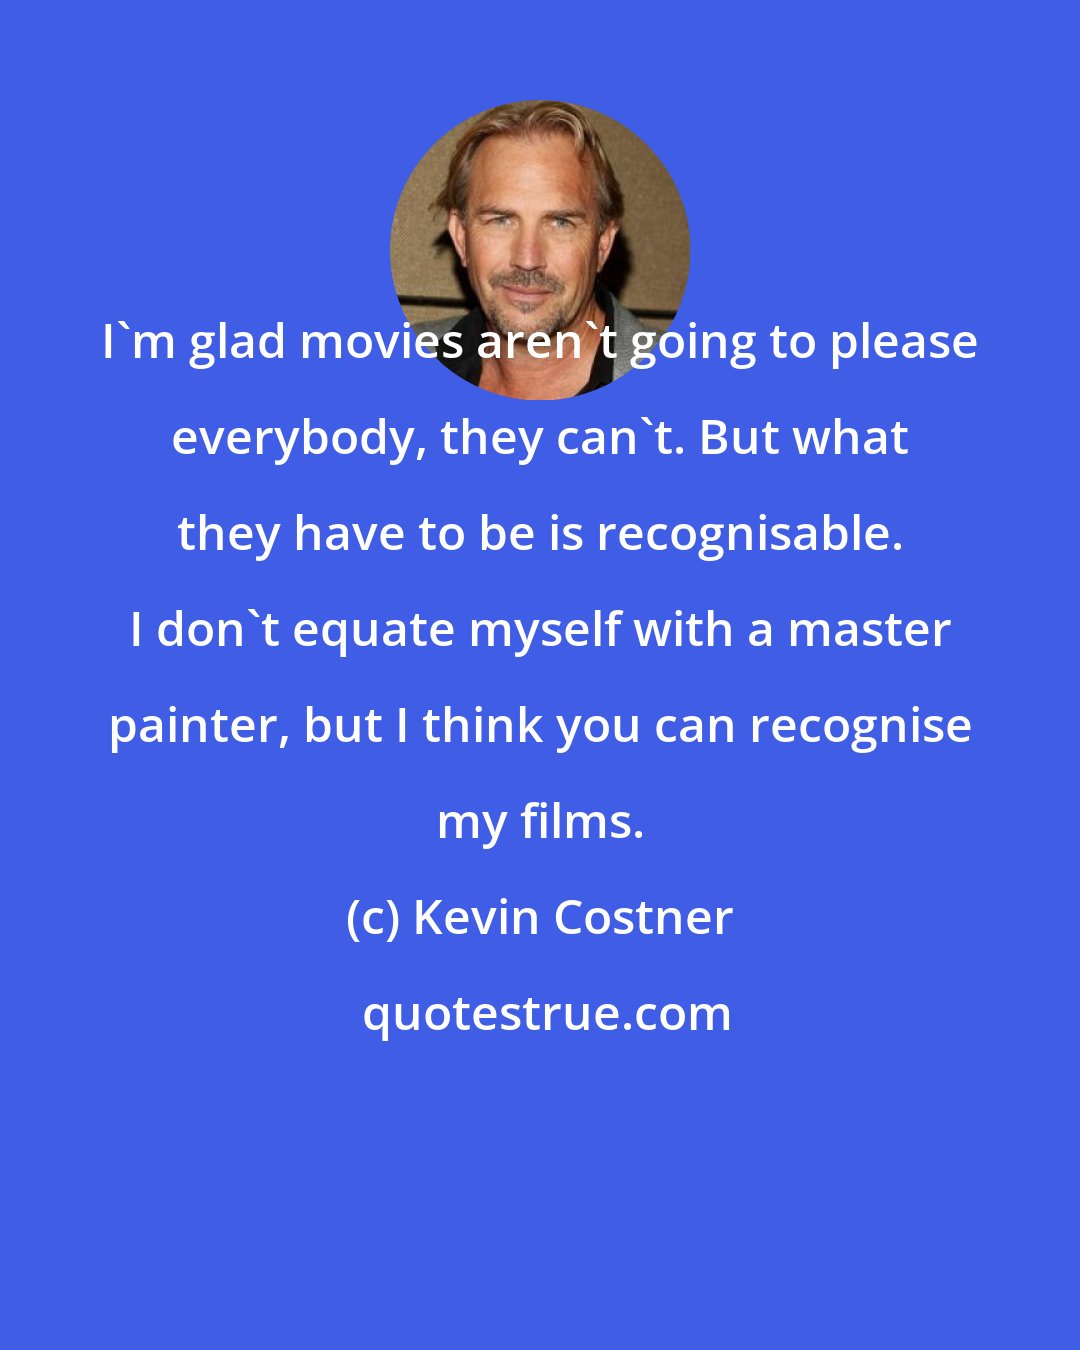 Kevin Costner: I'm glad movies aren't going to please everybody, they can't. But what they have to be is recognisable. I don't equate myself with a master painter, but I think you can recognise my films.